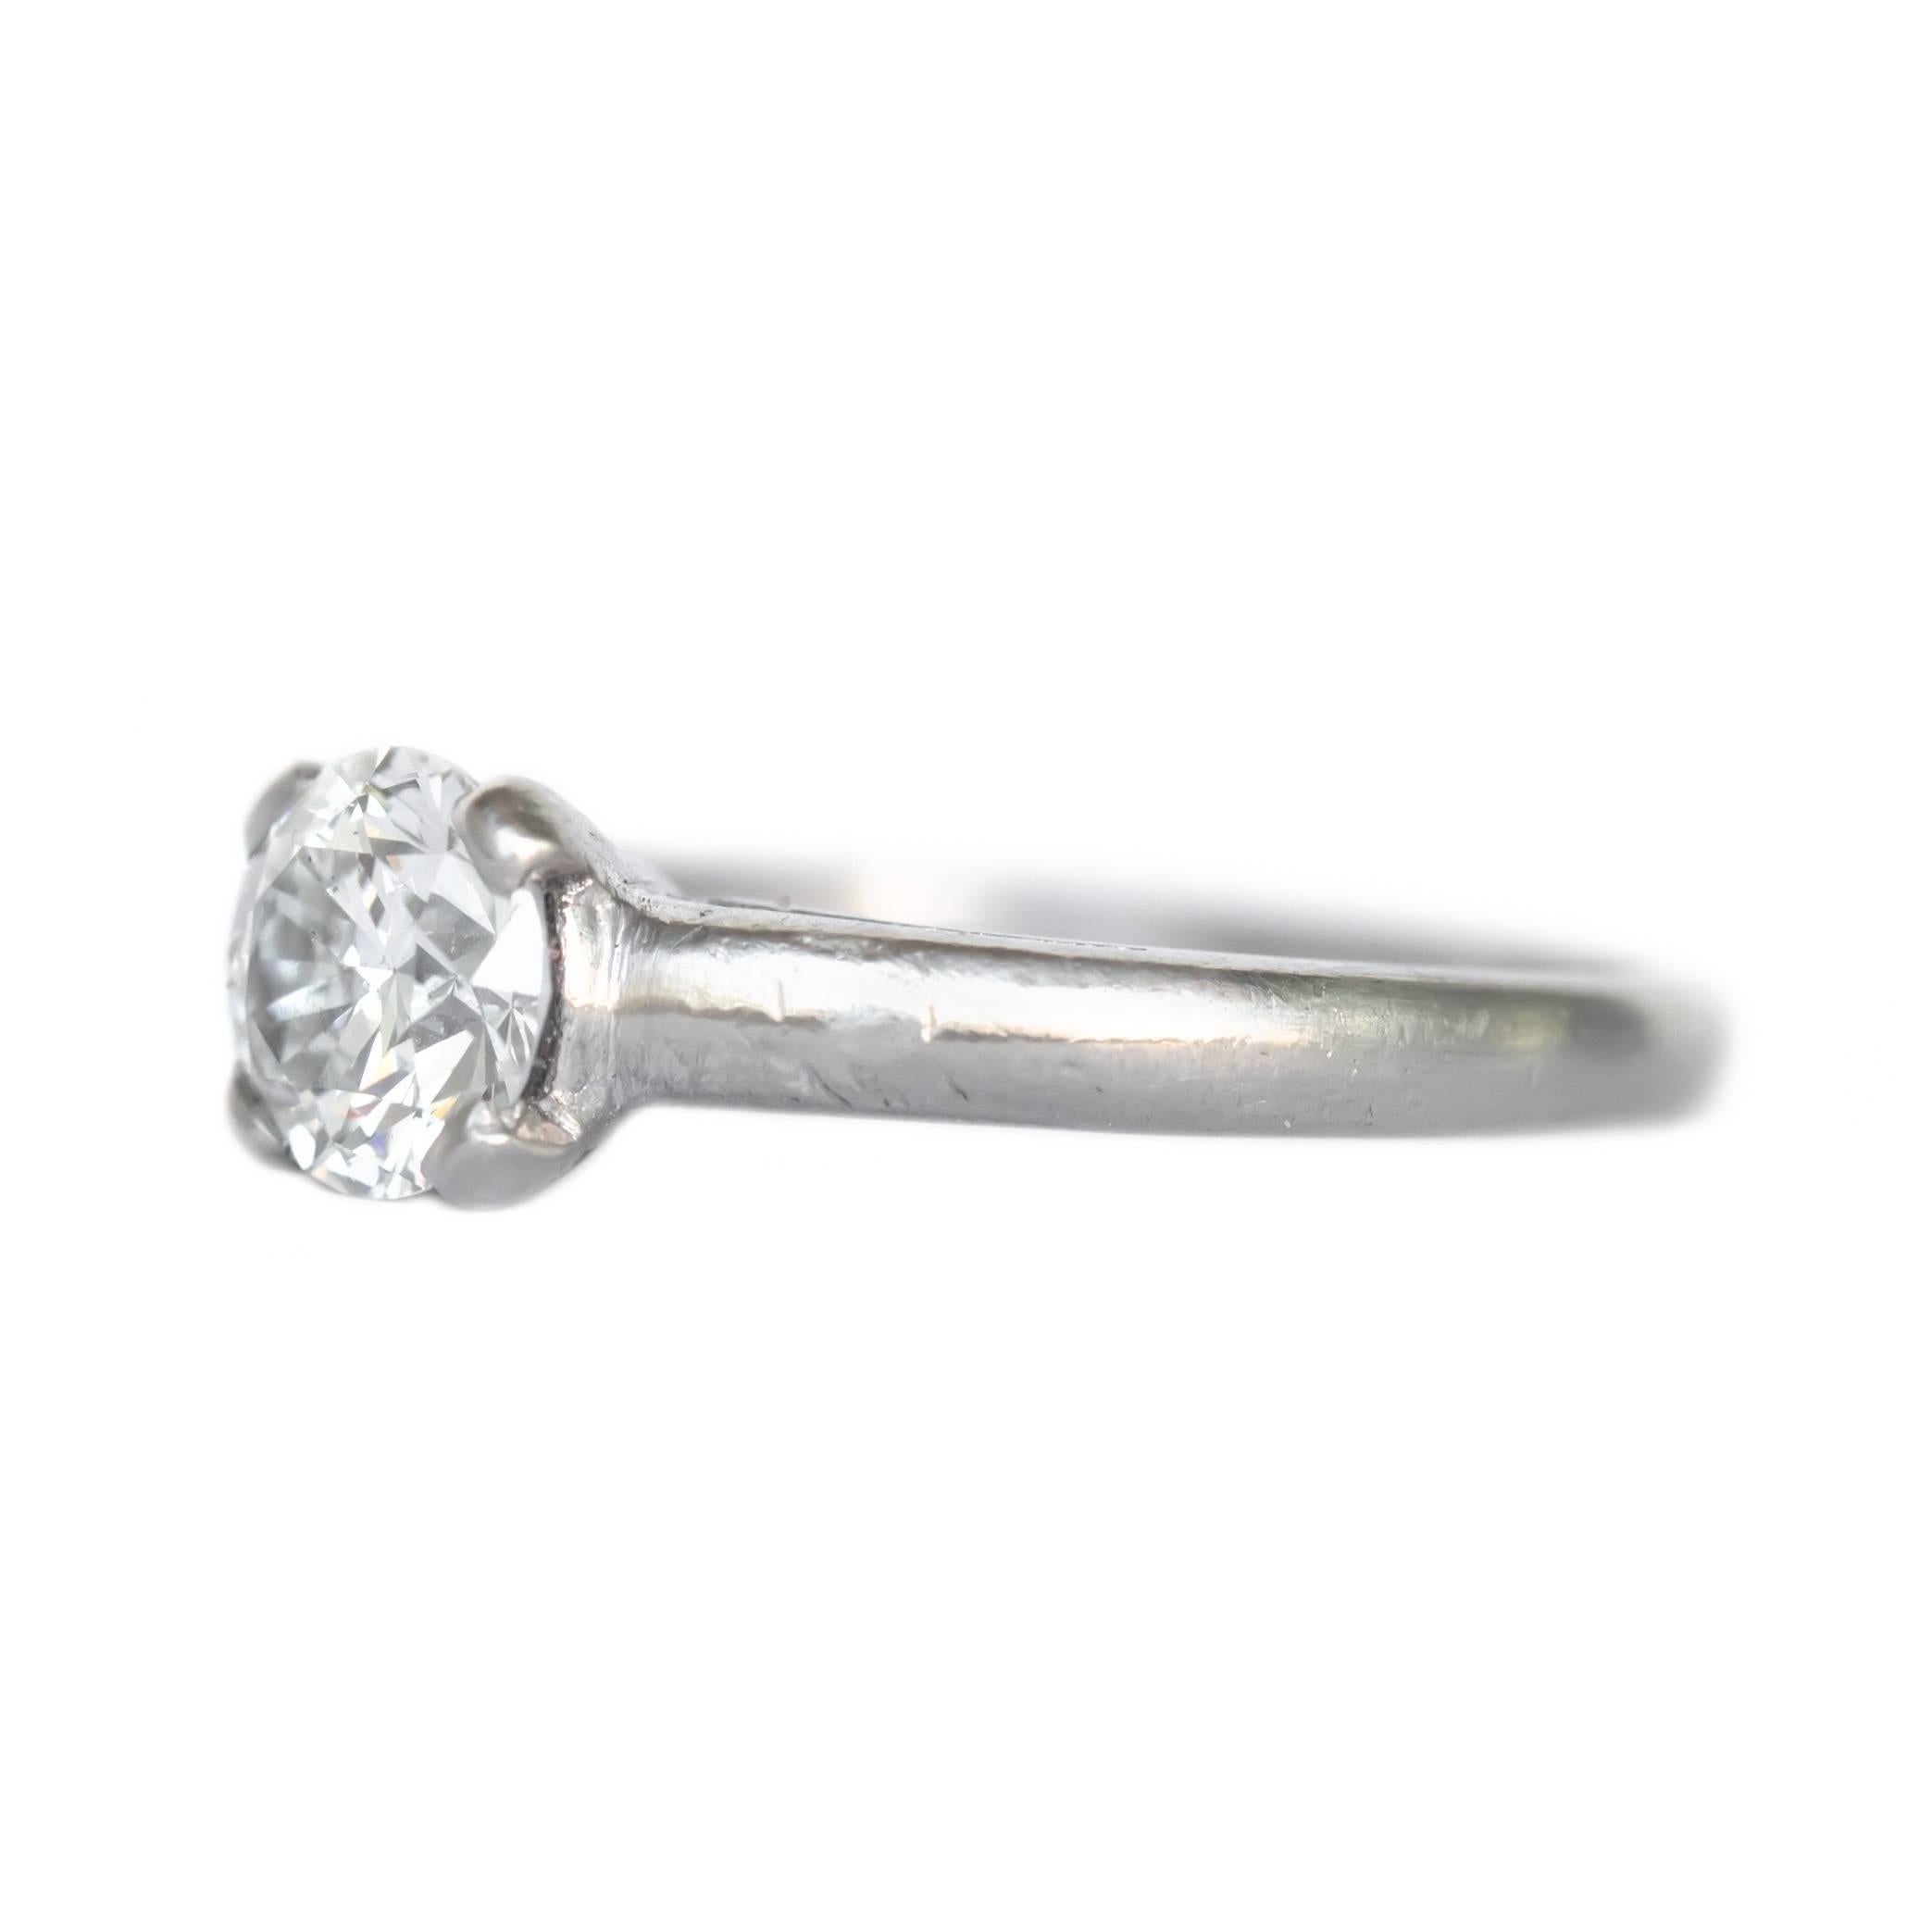 Item Details: 
Ring Size: 4.5
Metal Type: Platinum
Weight: 3.8 grams

Center Diamond Details
GIA CERTIFIED Center Diamond - Certificate # 2191201251
Shape: Round Brilliant 
Carat Weight: .73 Carat
Color: G
Clarity: VVS2

Finger to Top of Stone